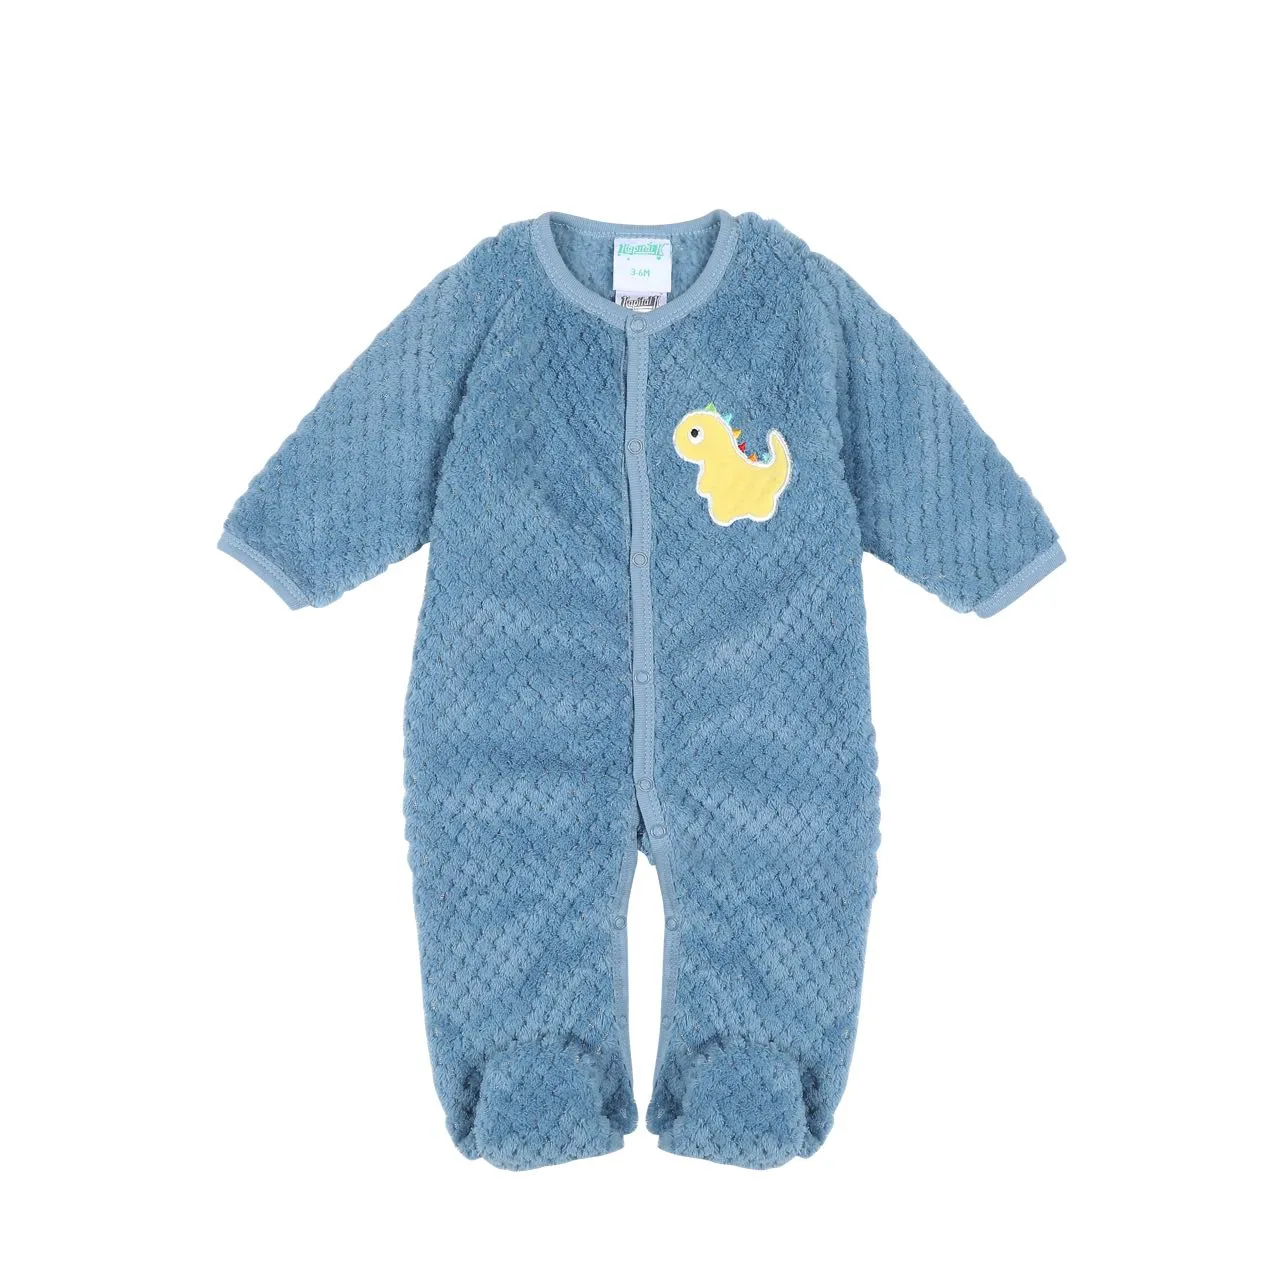 Wholesale rompers new born baby clothes boys 6 - 9 month